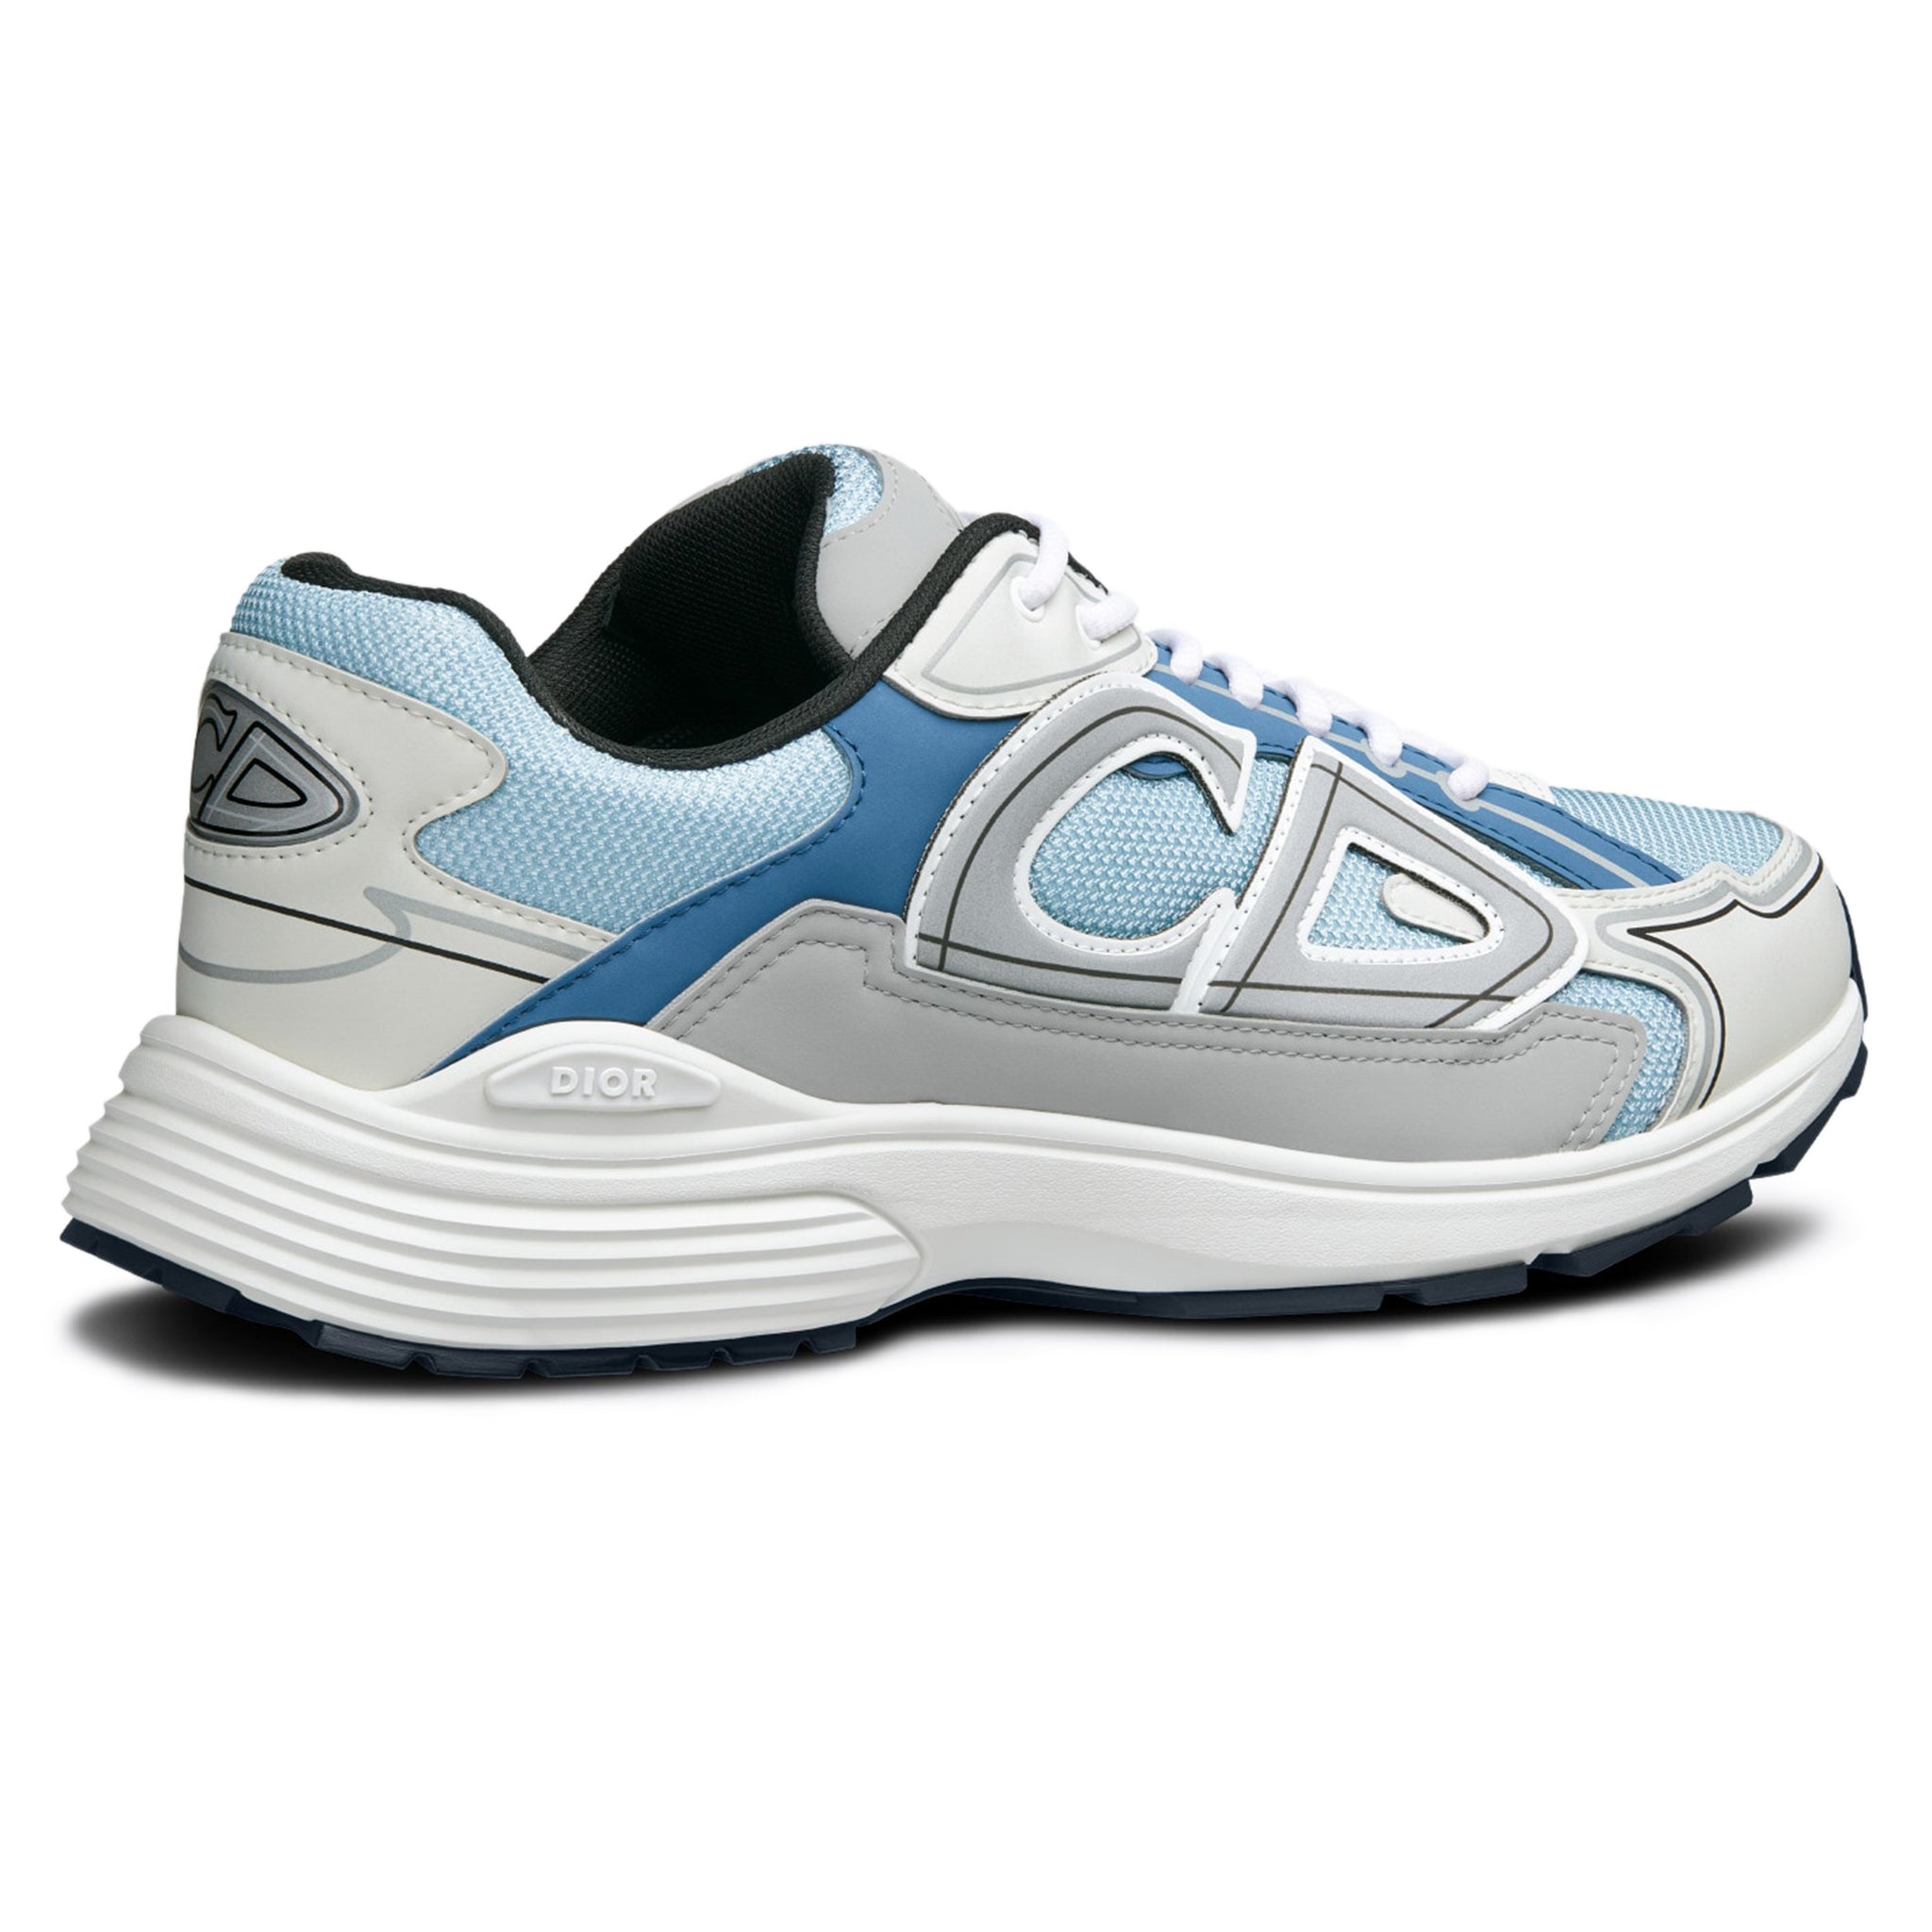 Image of Dior B30 Technical Mesh Light Blue Grey Trainer